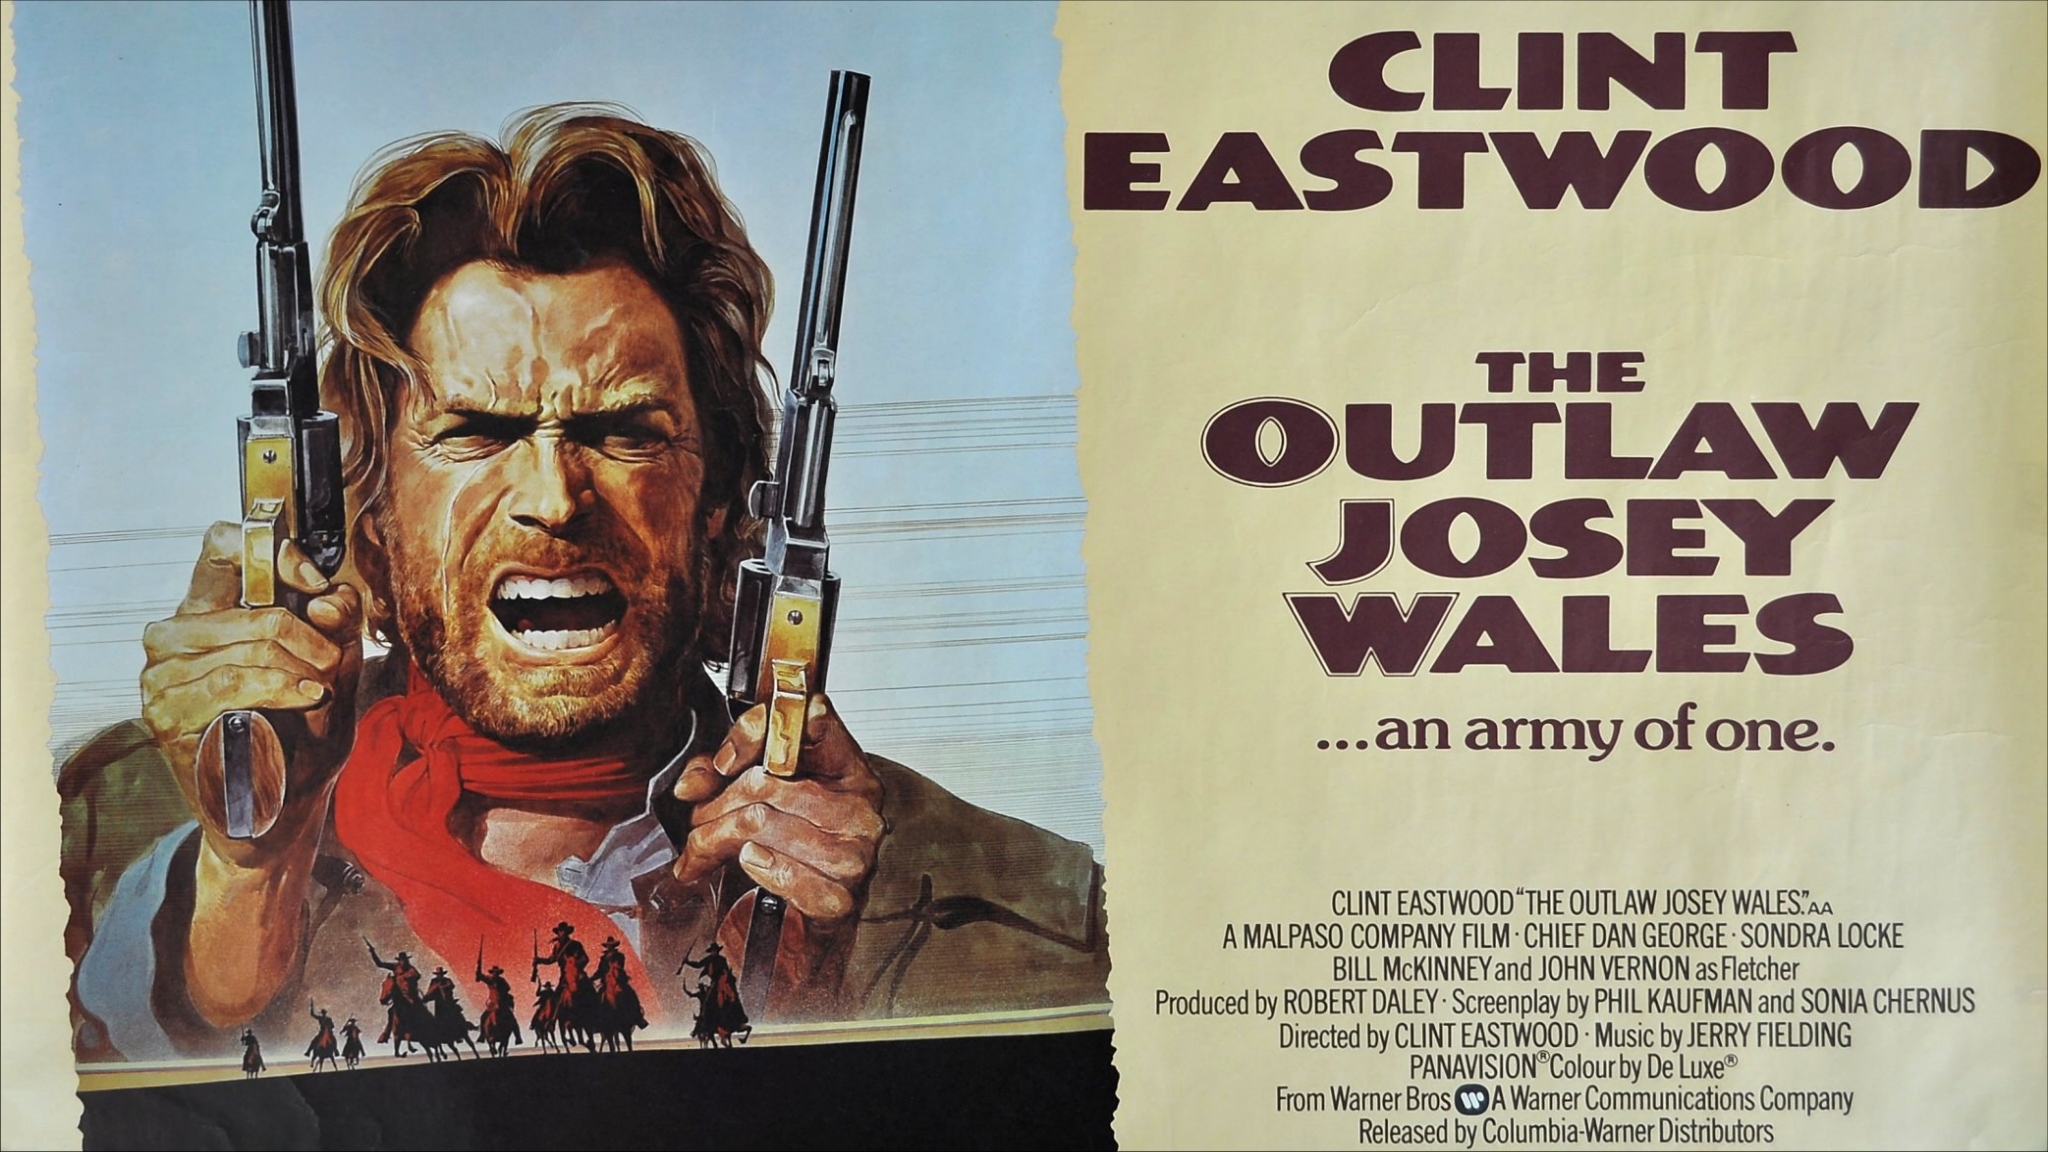 clint eastwood, the outlaw josey wales, movie 1080p